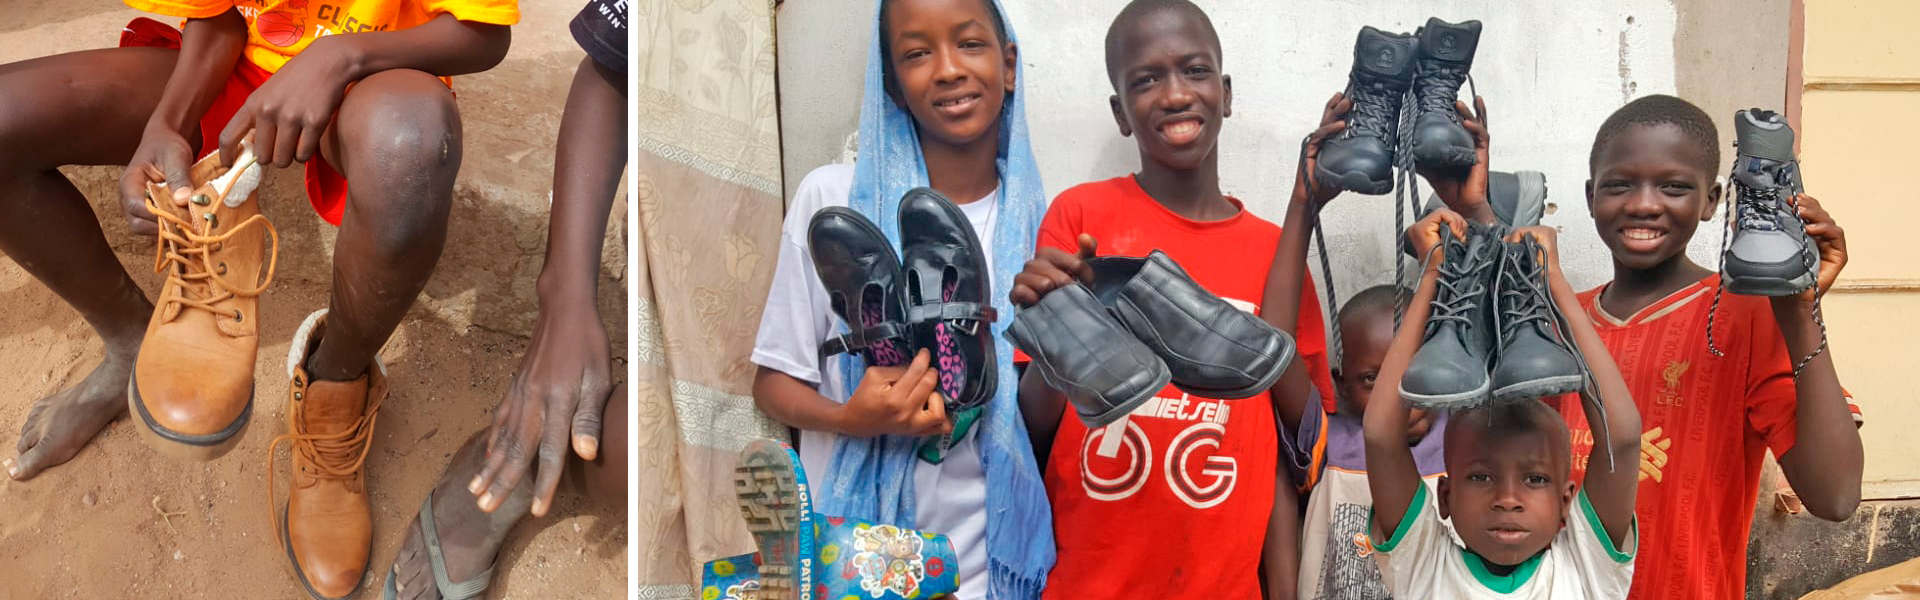 The Gambia Shoe Gallery 1